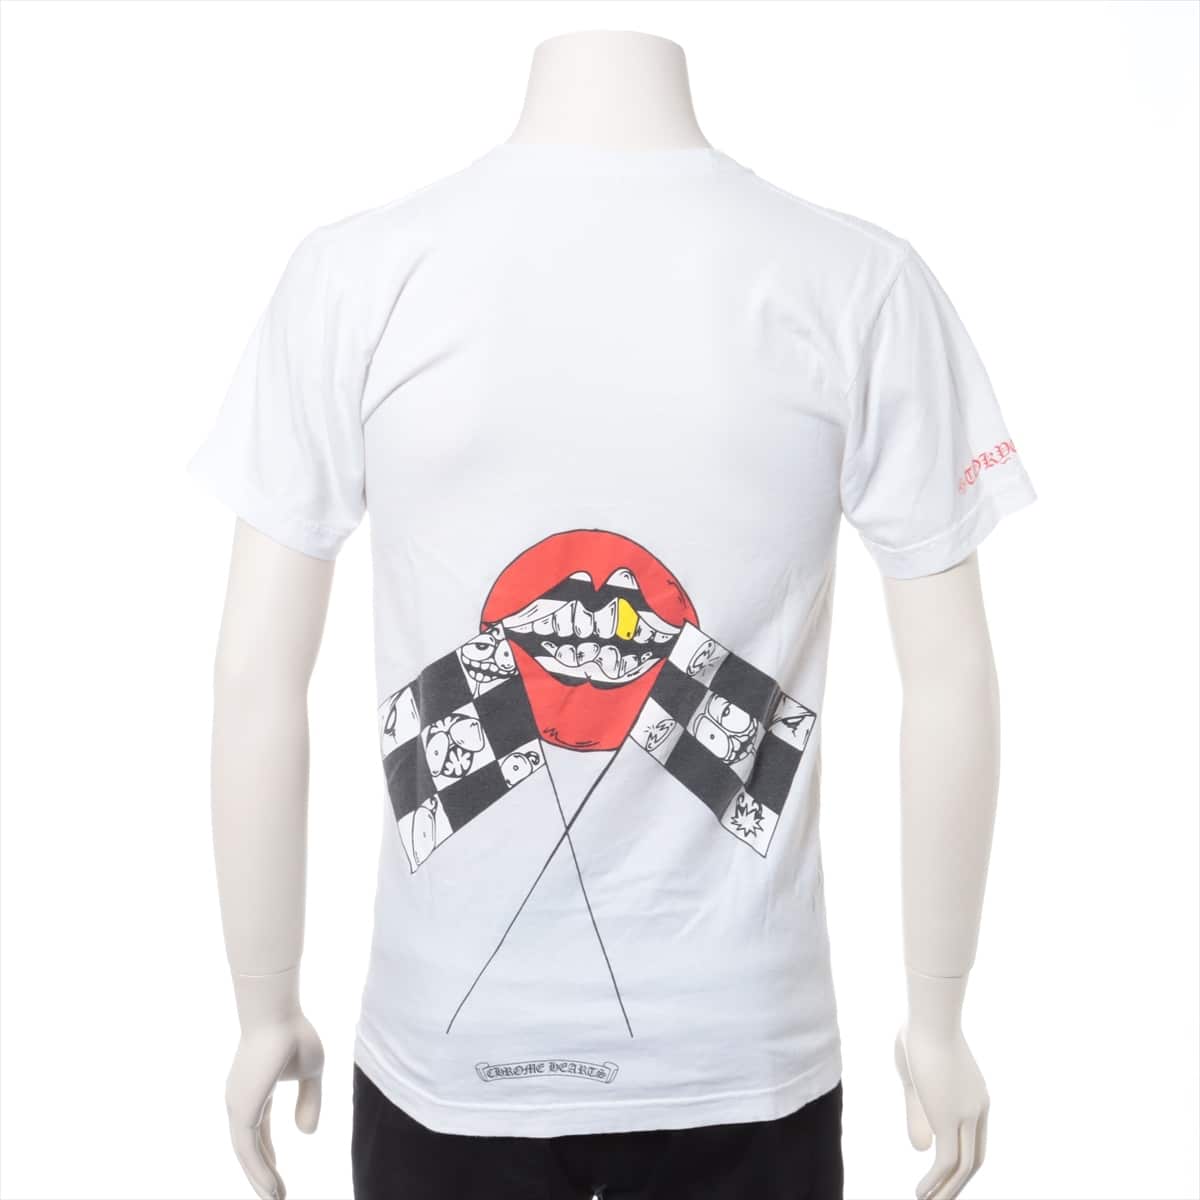 Chrome Hearts Matty Boy T-shirt Cotton White S There is partial color transfer on the back print